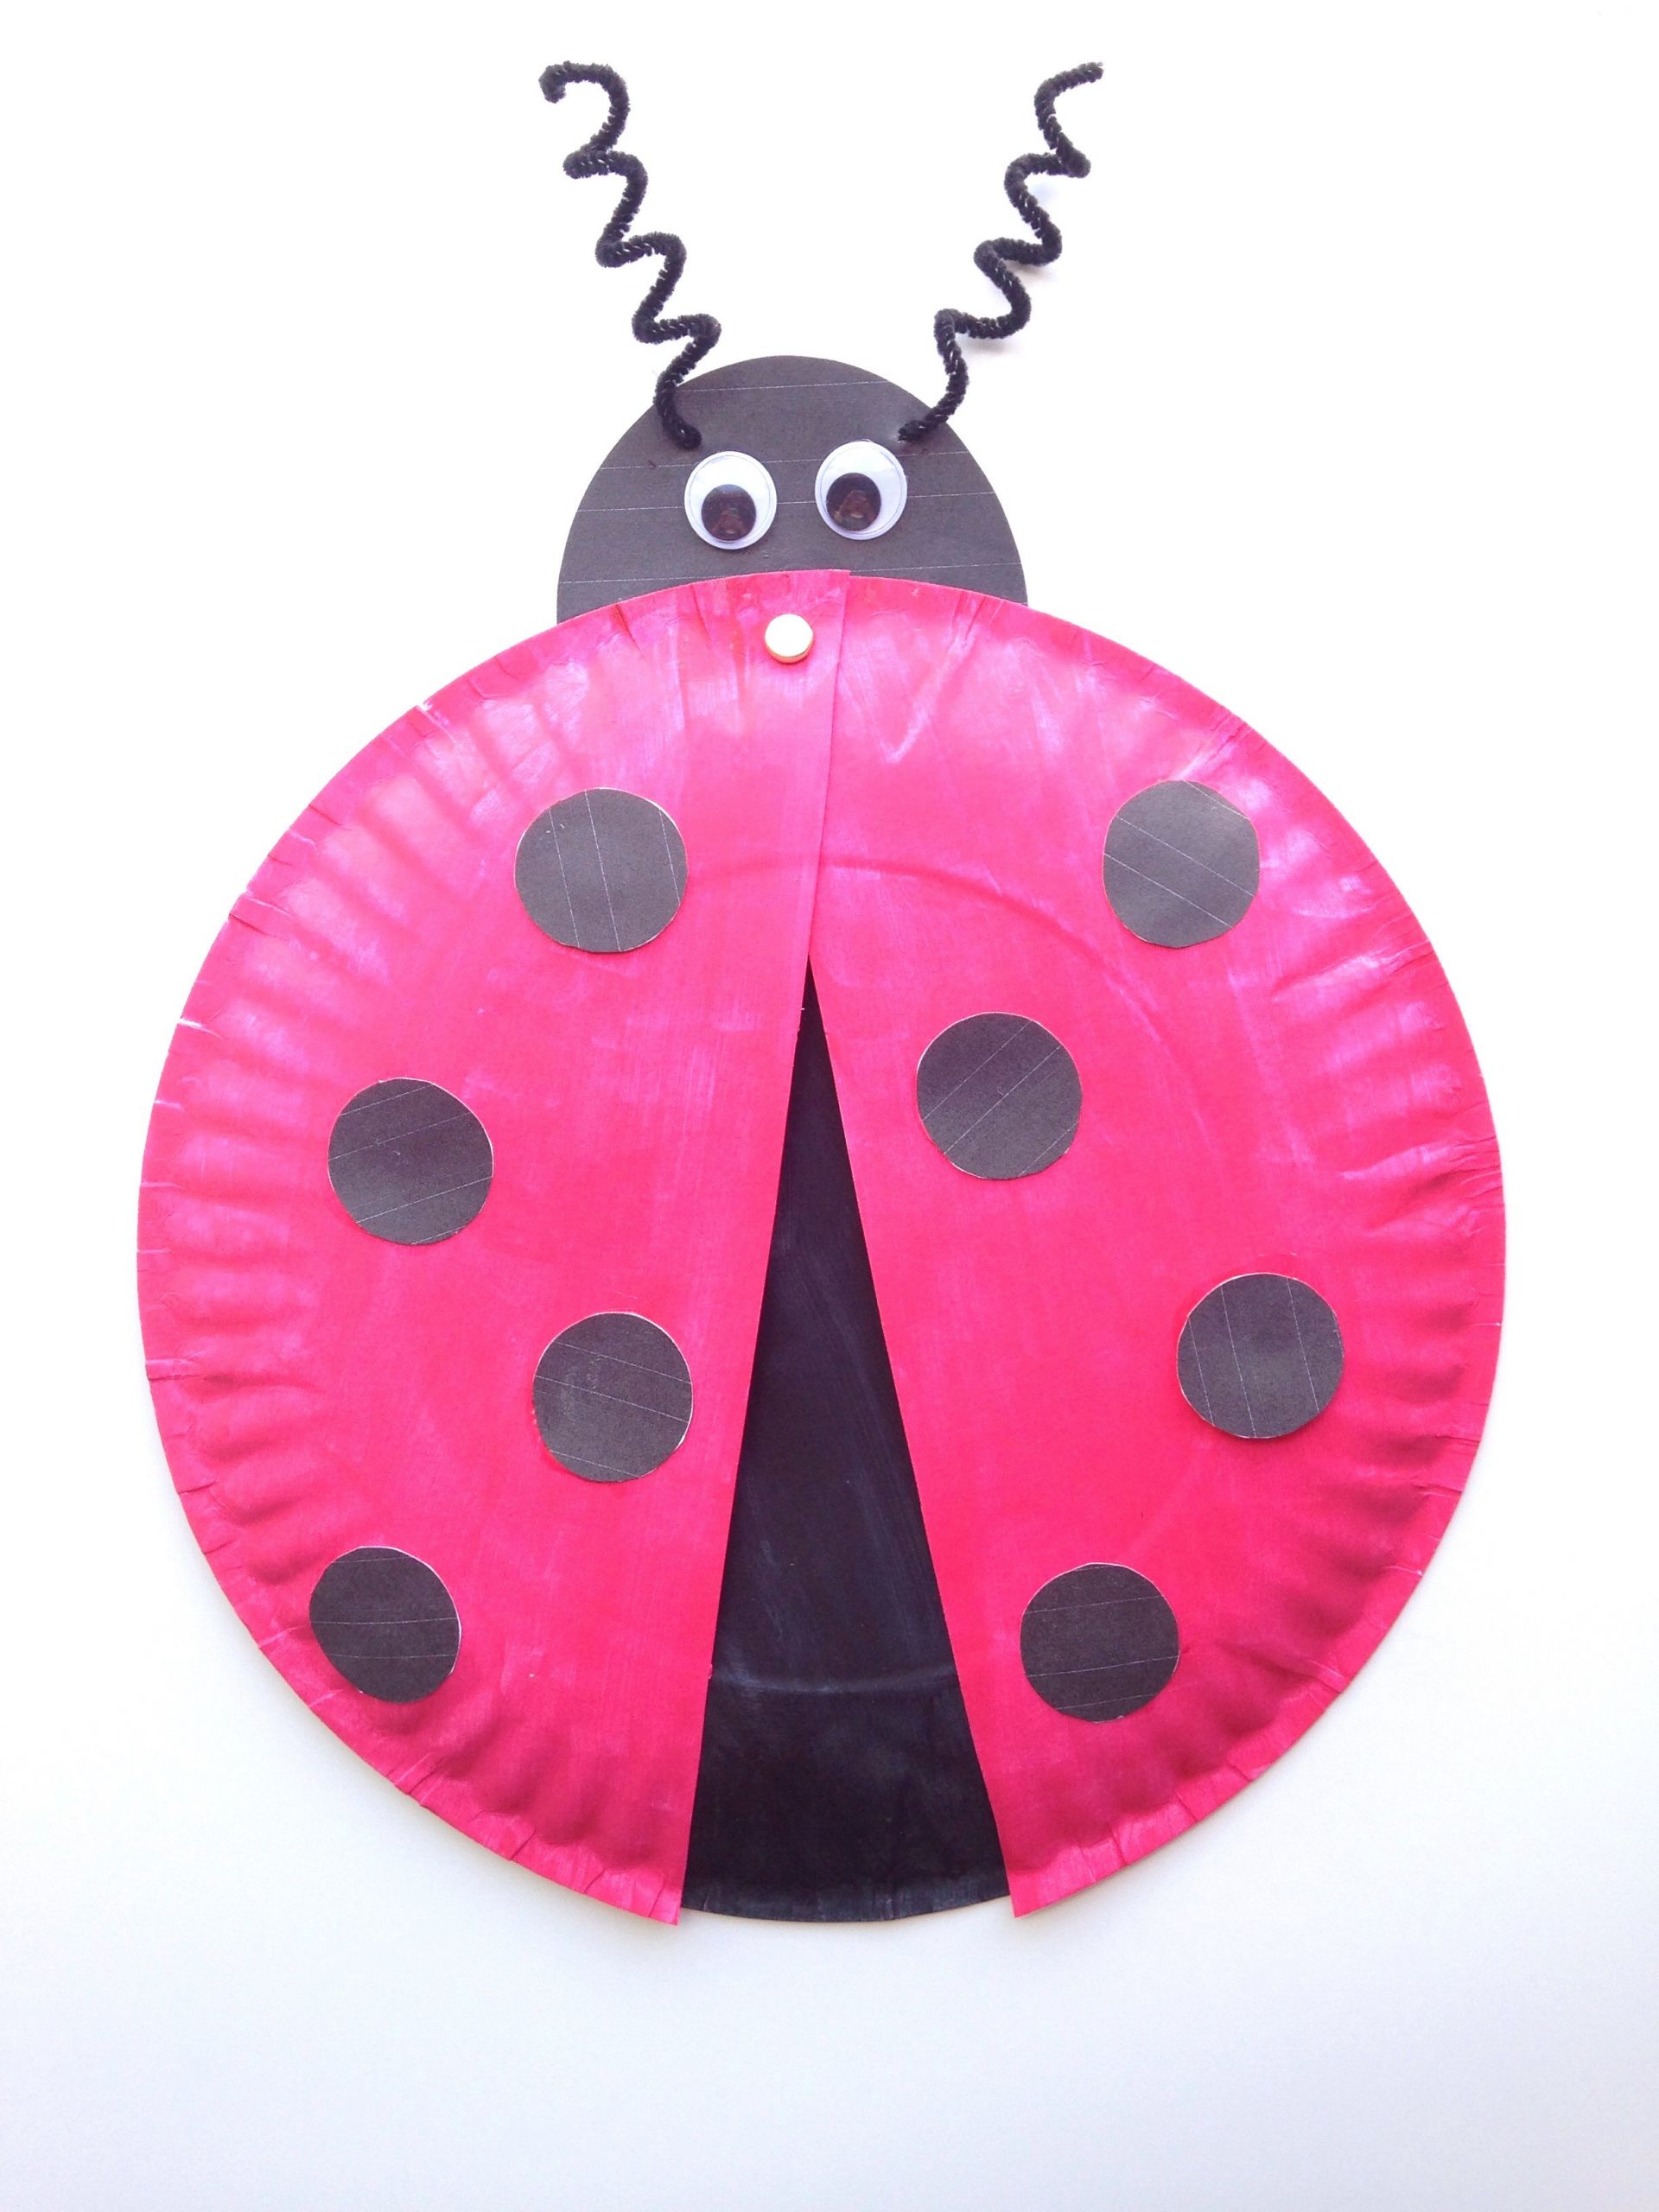 Arts &amp; Crafts For Toddlers
 Ladybug Paper Plate Craft for Kids Free Printable